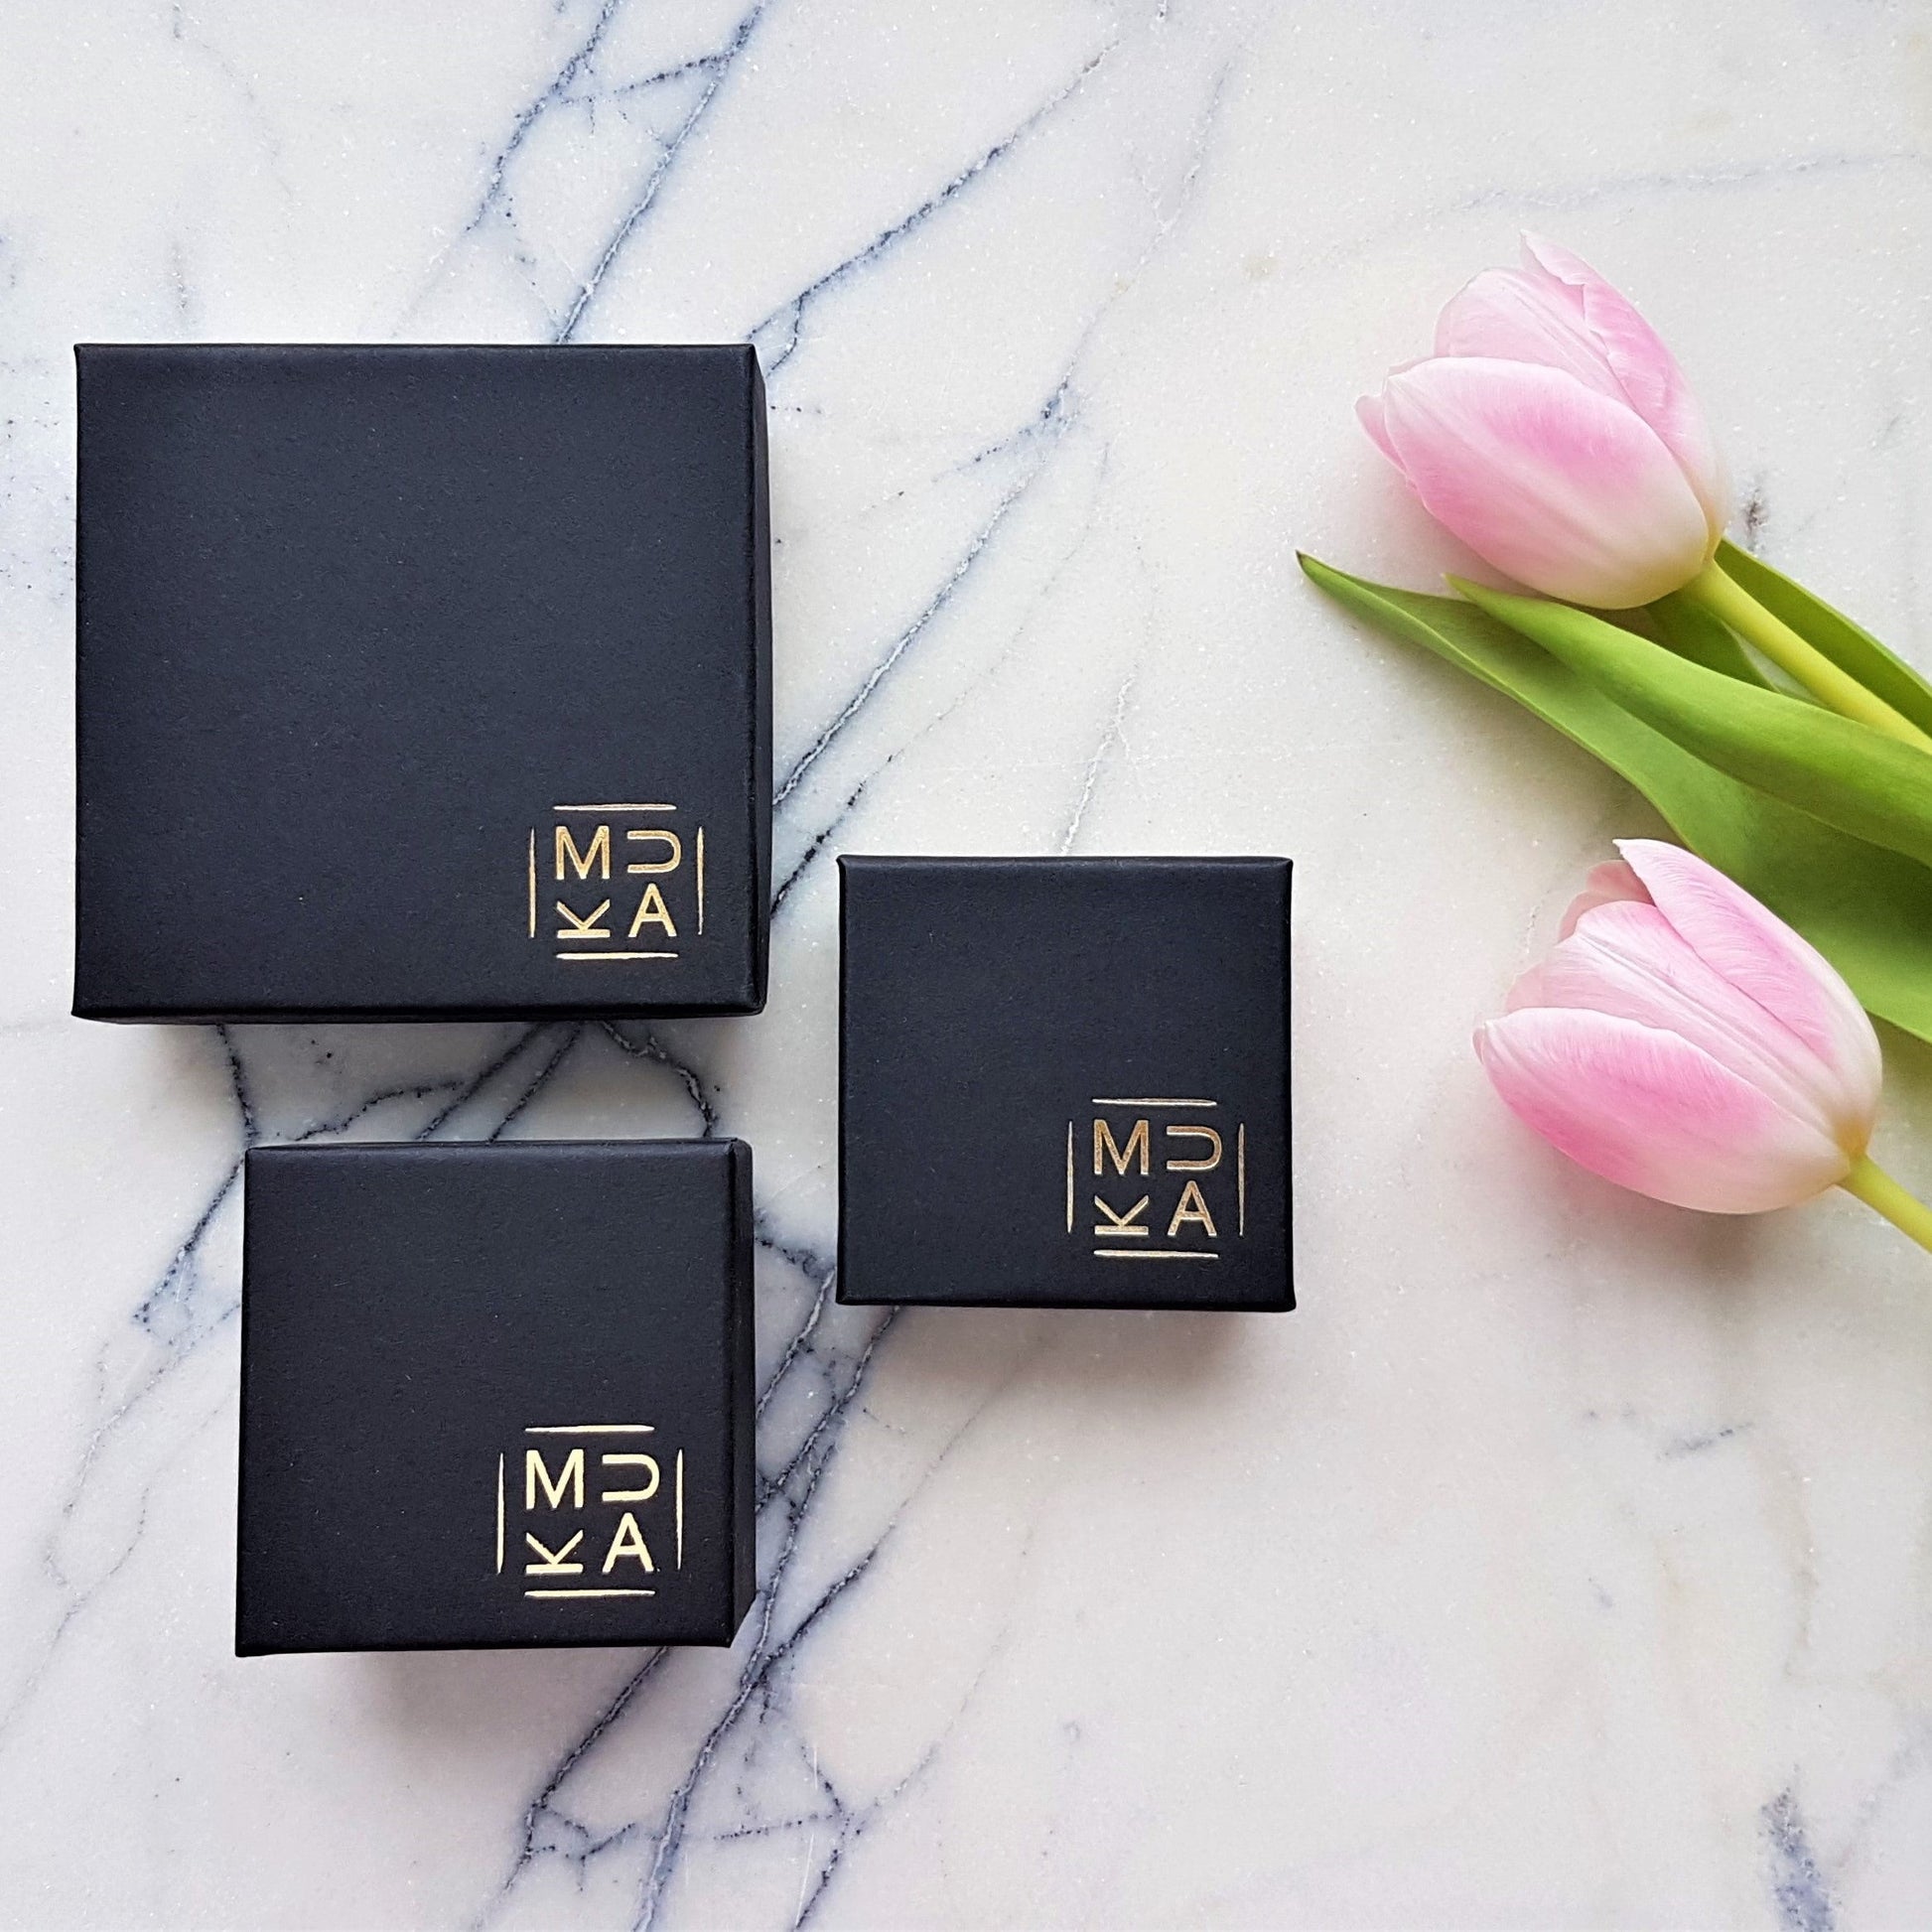 Black jewellery boxes with MUKA studio logo in gold, boxes are sat on marble surface next to pink tulip flowers